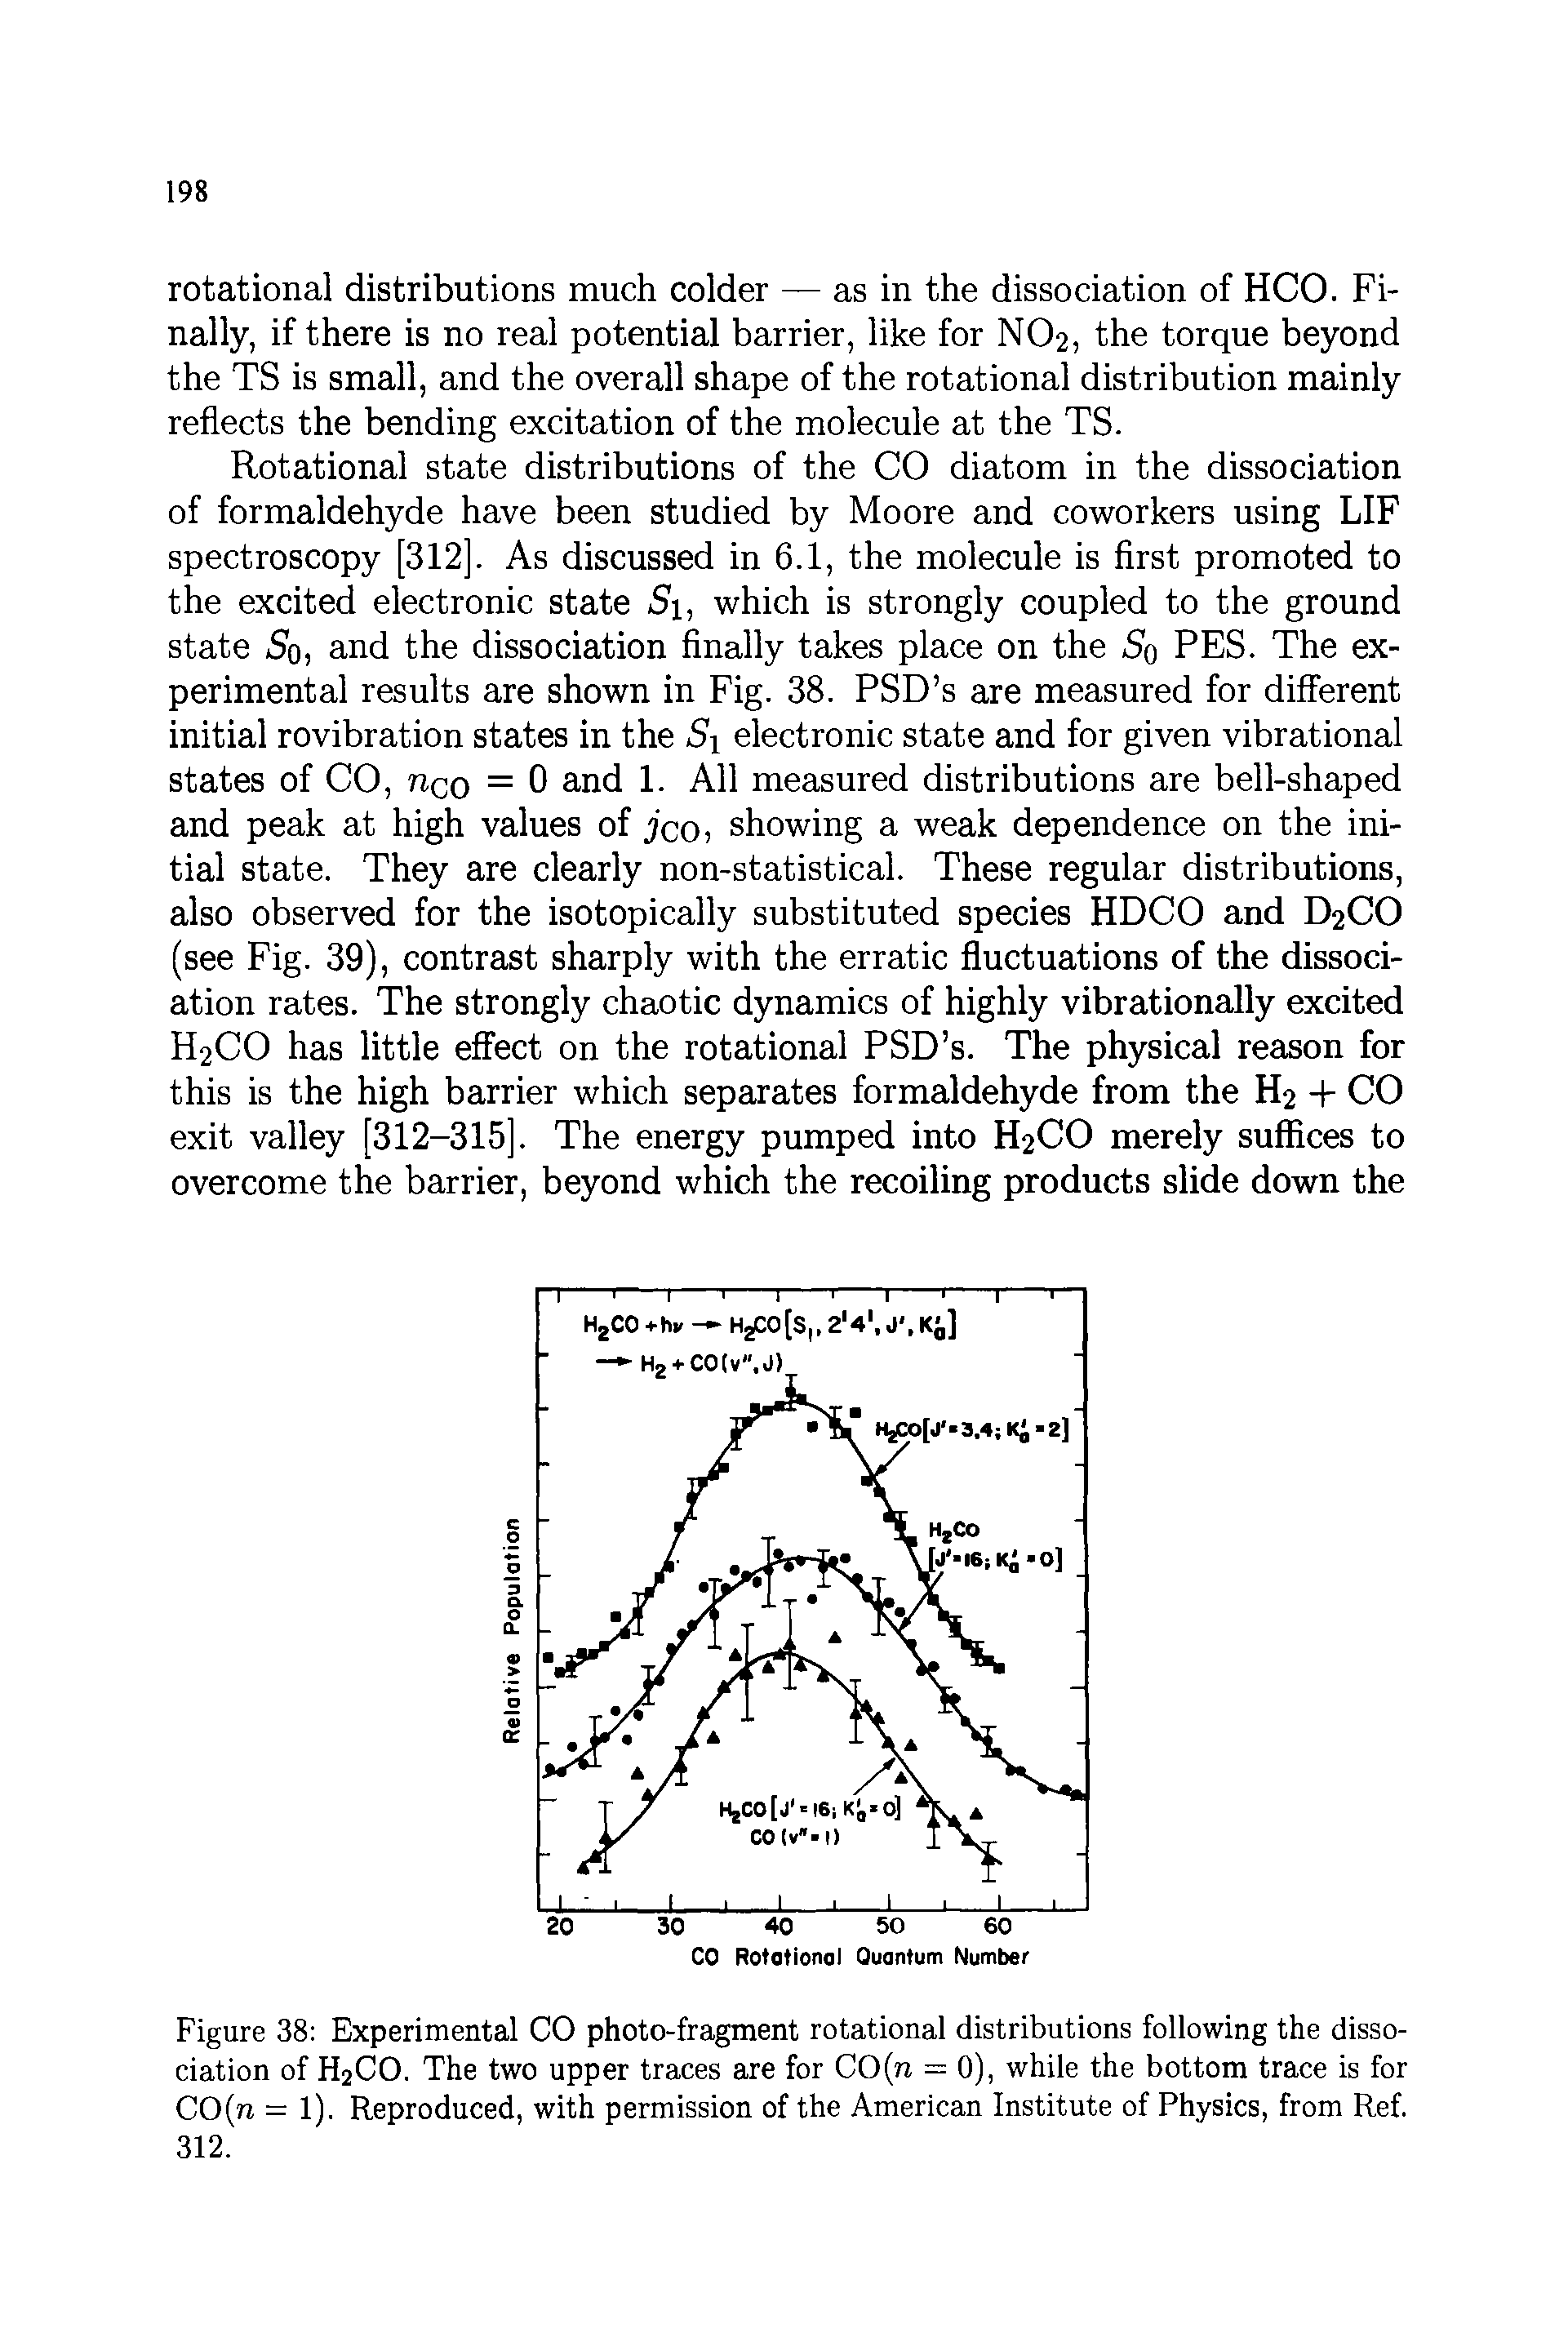 Figure 38 Experimental CO photo-fragment rotational distributions following the dissociation of H2CO. The two upper traces are for CO(n = 0), while the bottom trace is for CO(n = 1). Reproduced, with permission of the American Institute of Physics, from Ref. 312.